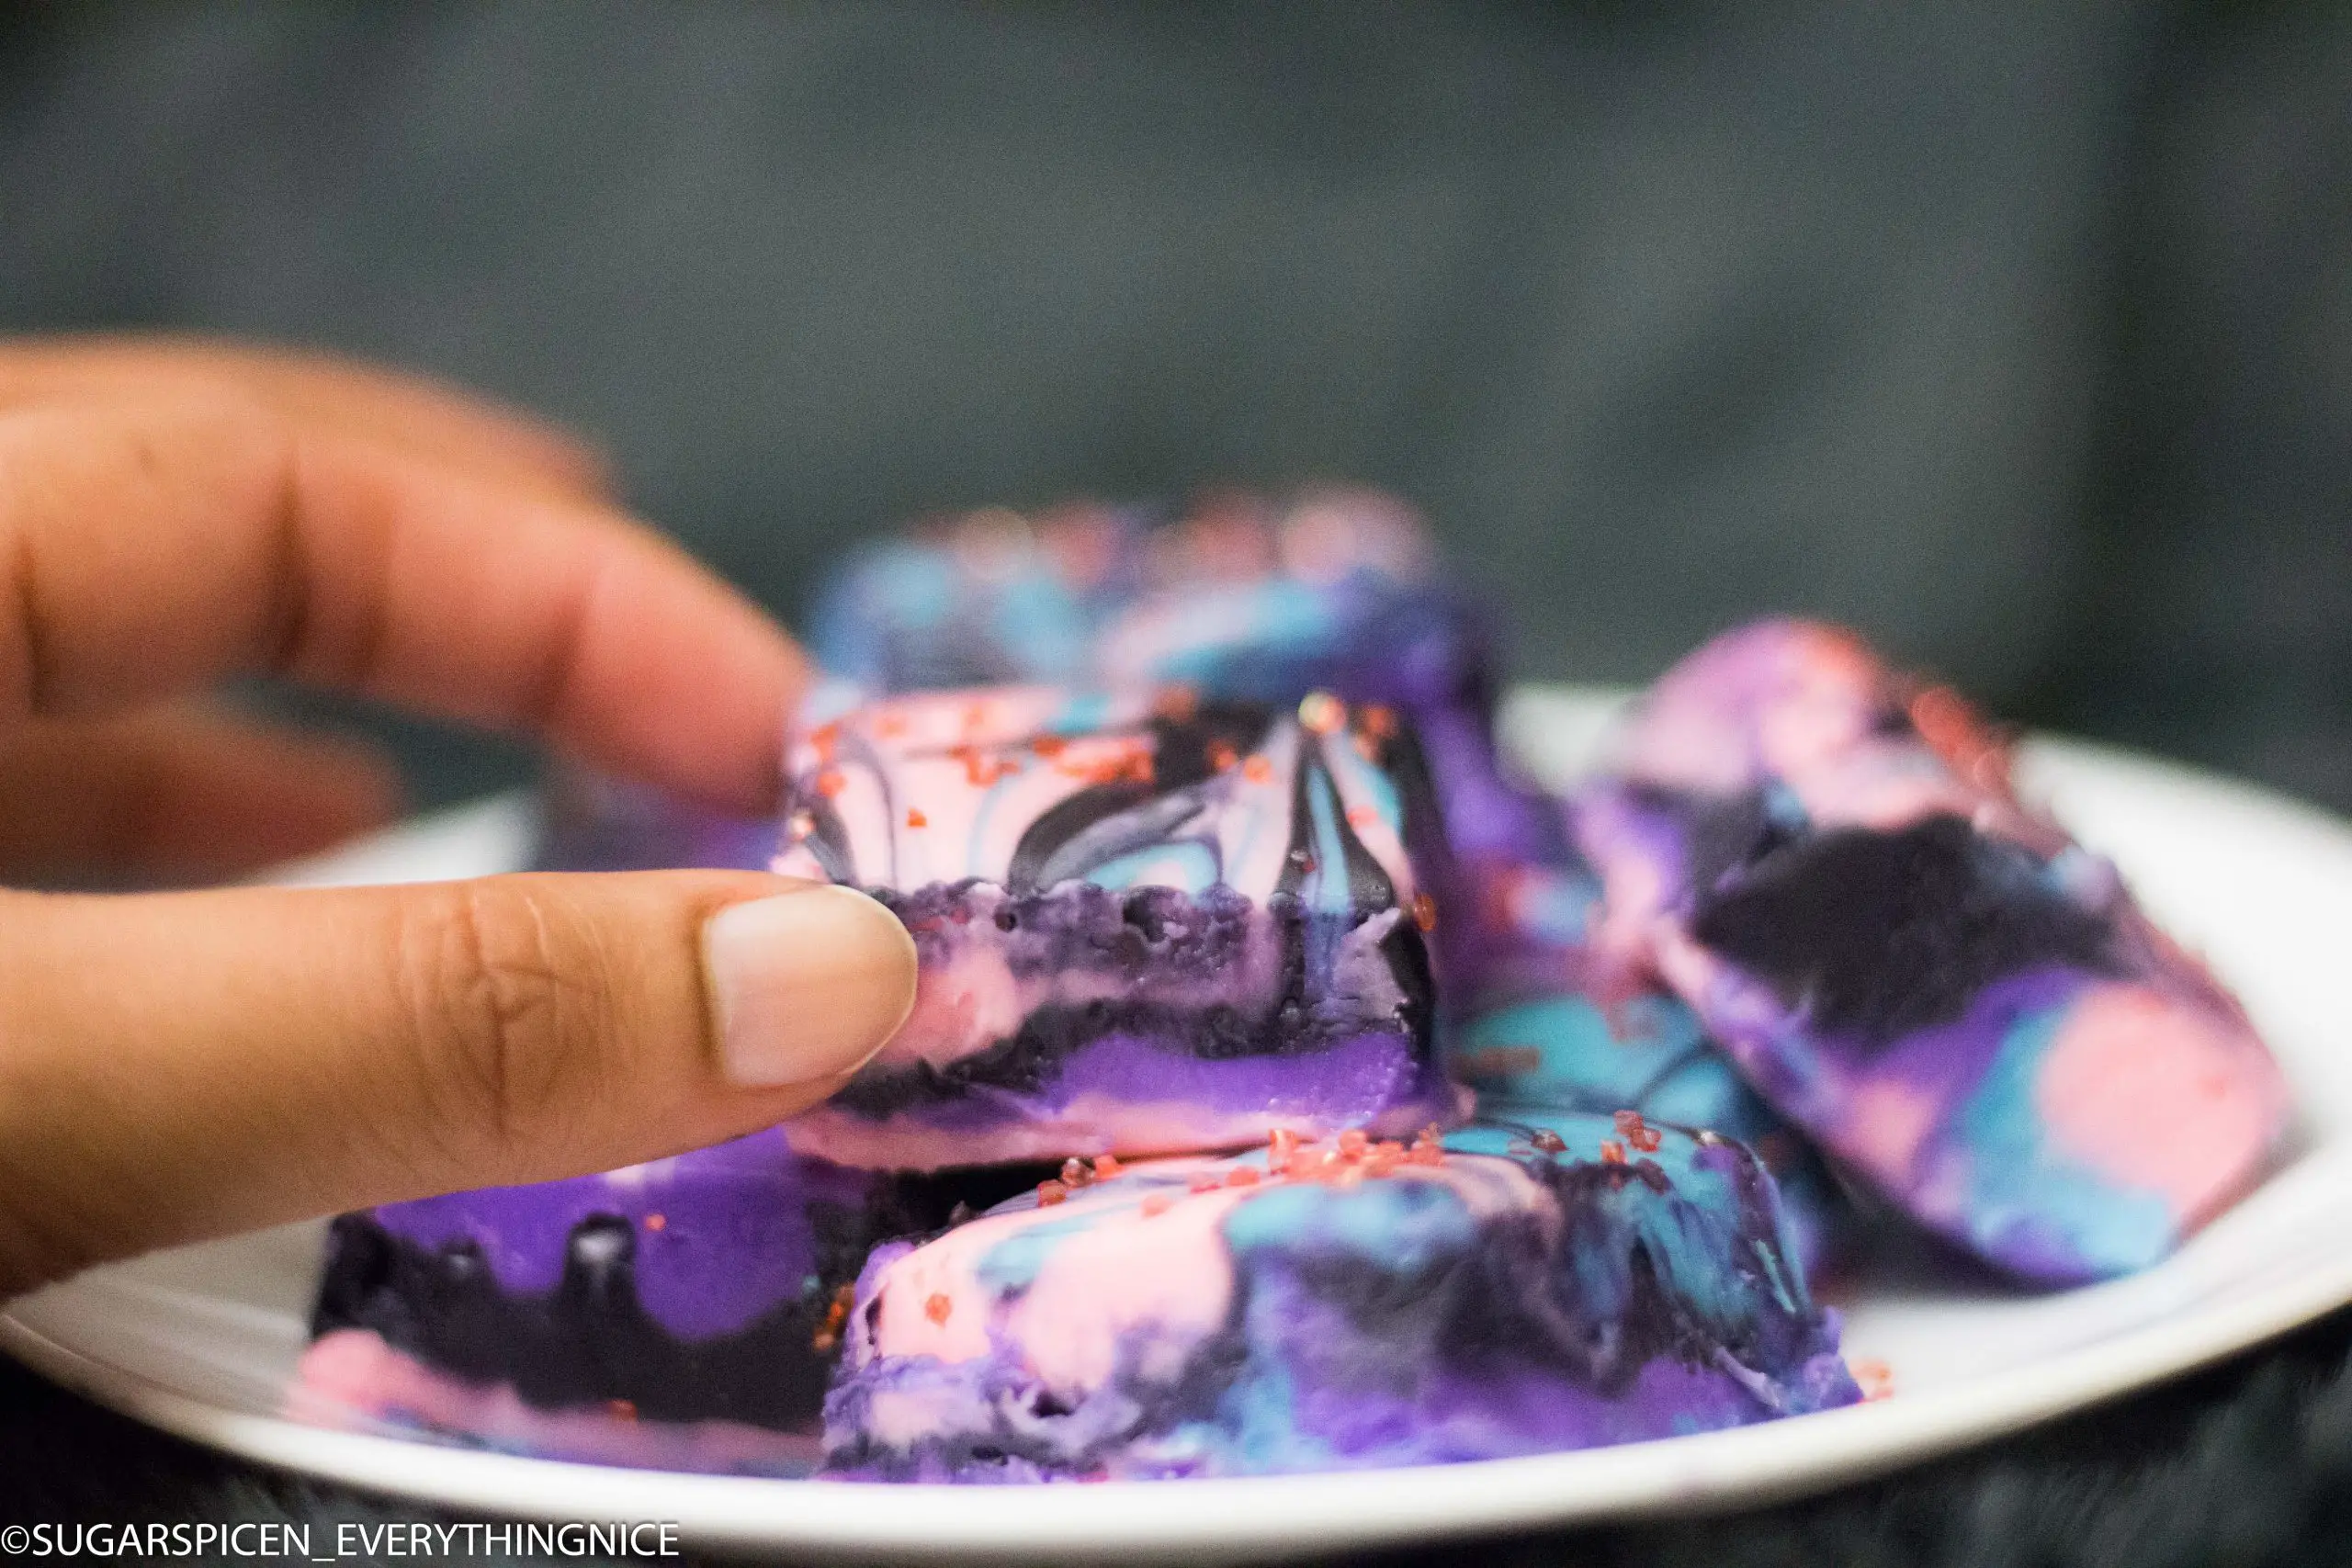 Galaxy fudges kept on a plate and a hand holding one of the fudge squares